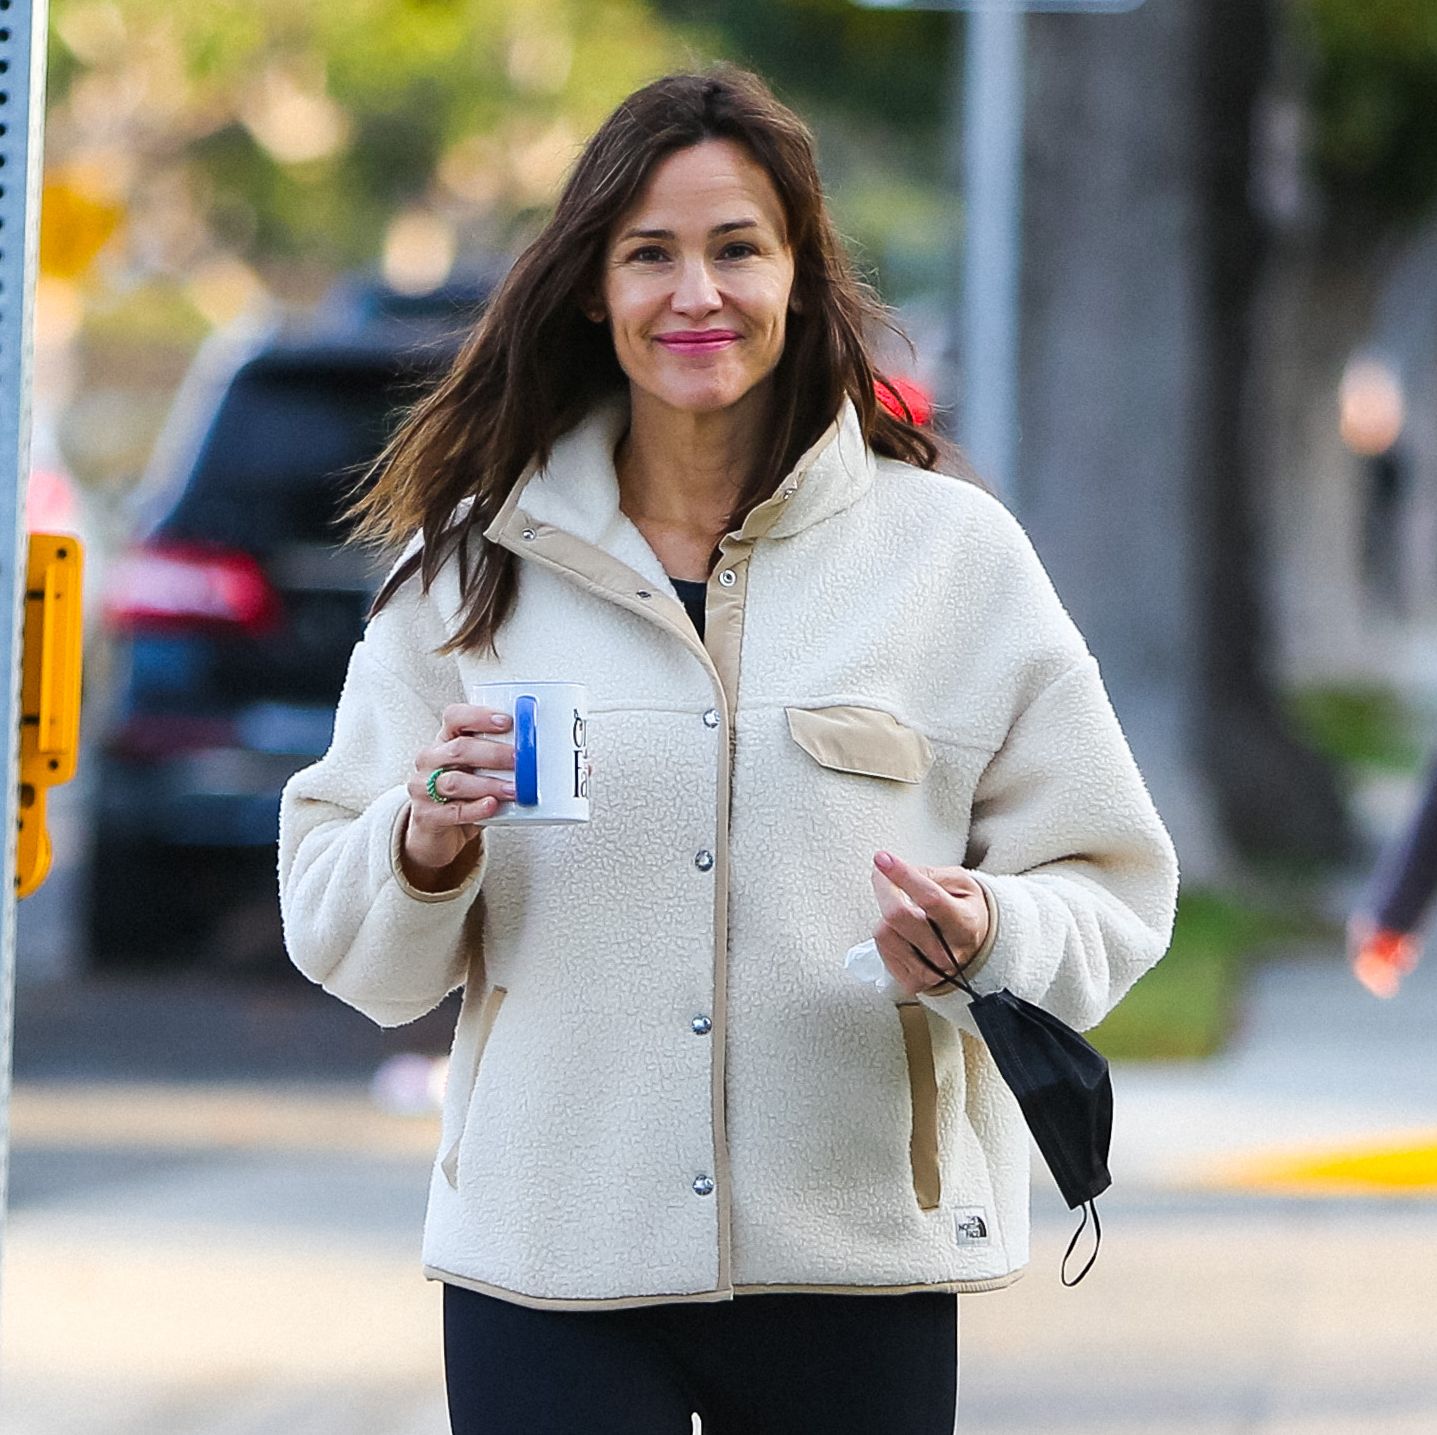 Jennifer Garner's Latest Go-To Sneakers Are From This Podiatrist-Approved Brand